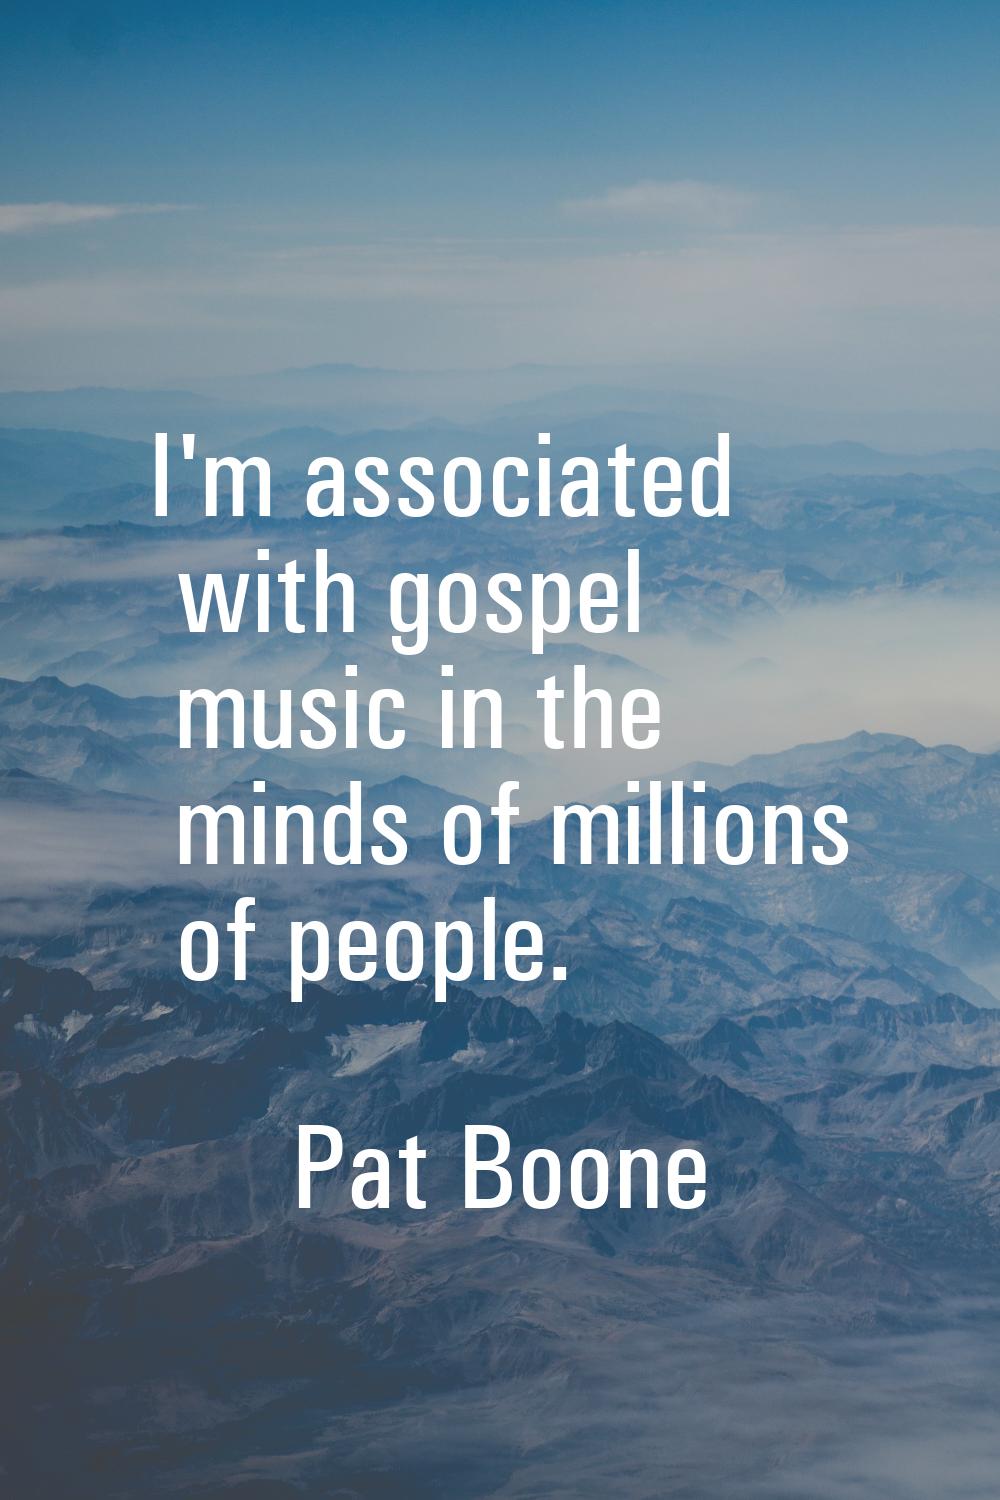 I'm associated with gospel music in the minds of millions of people.